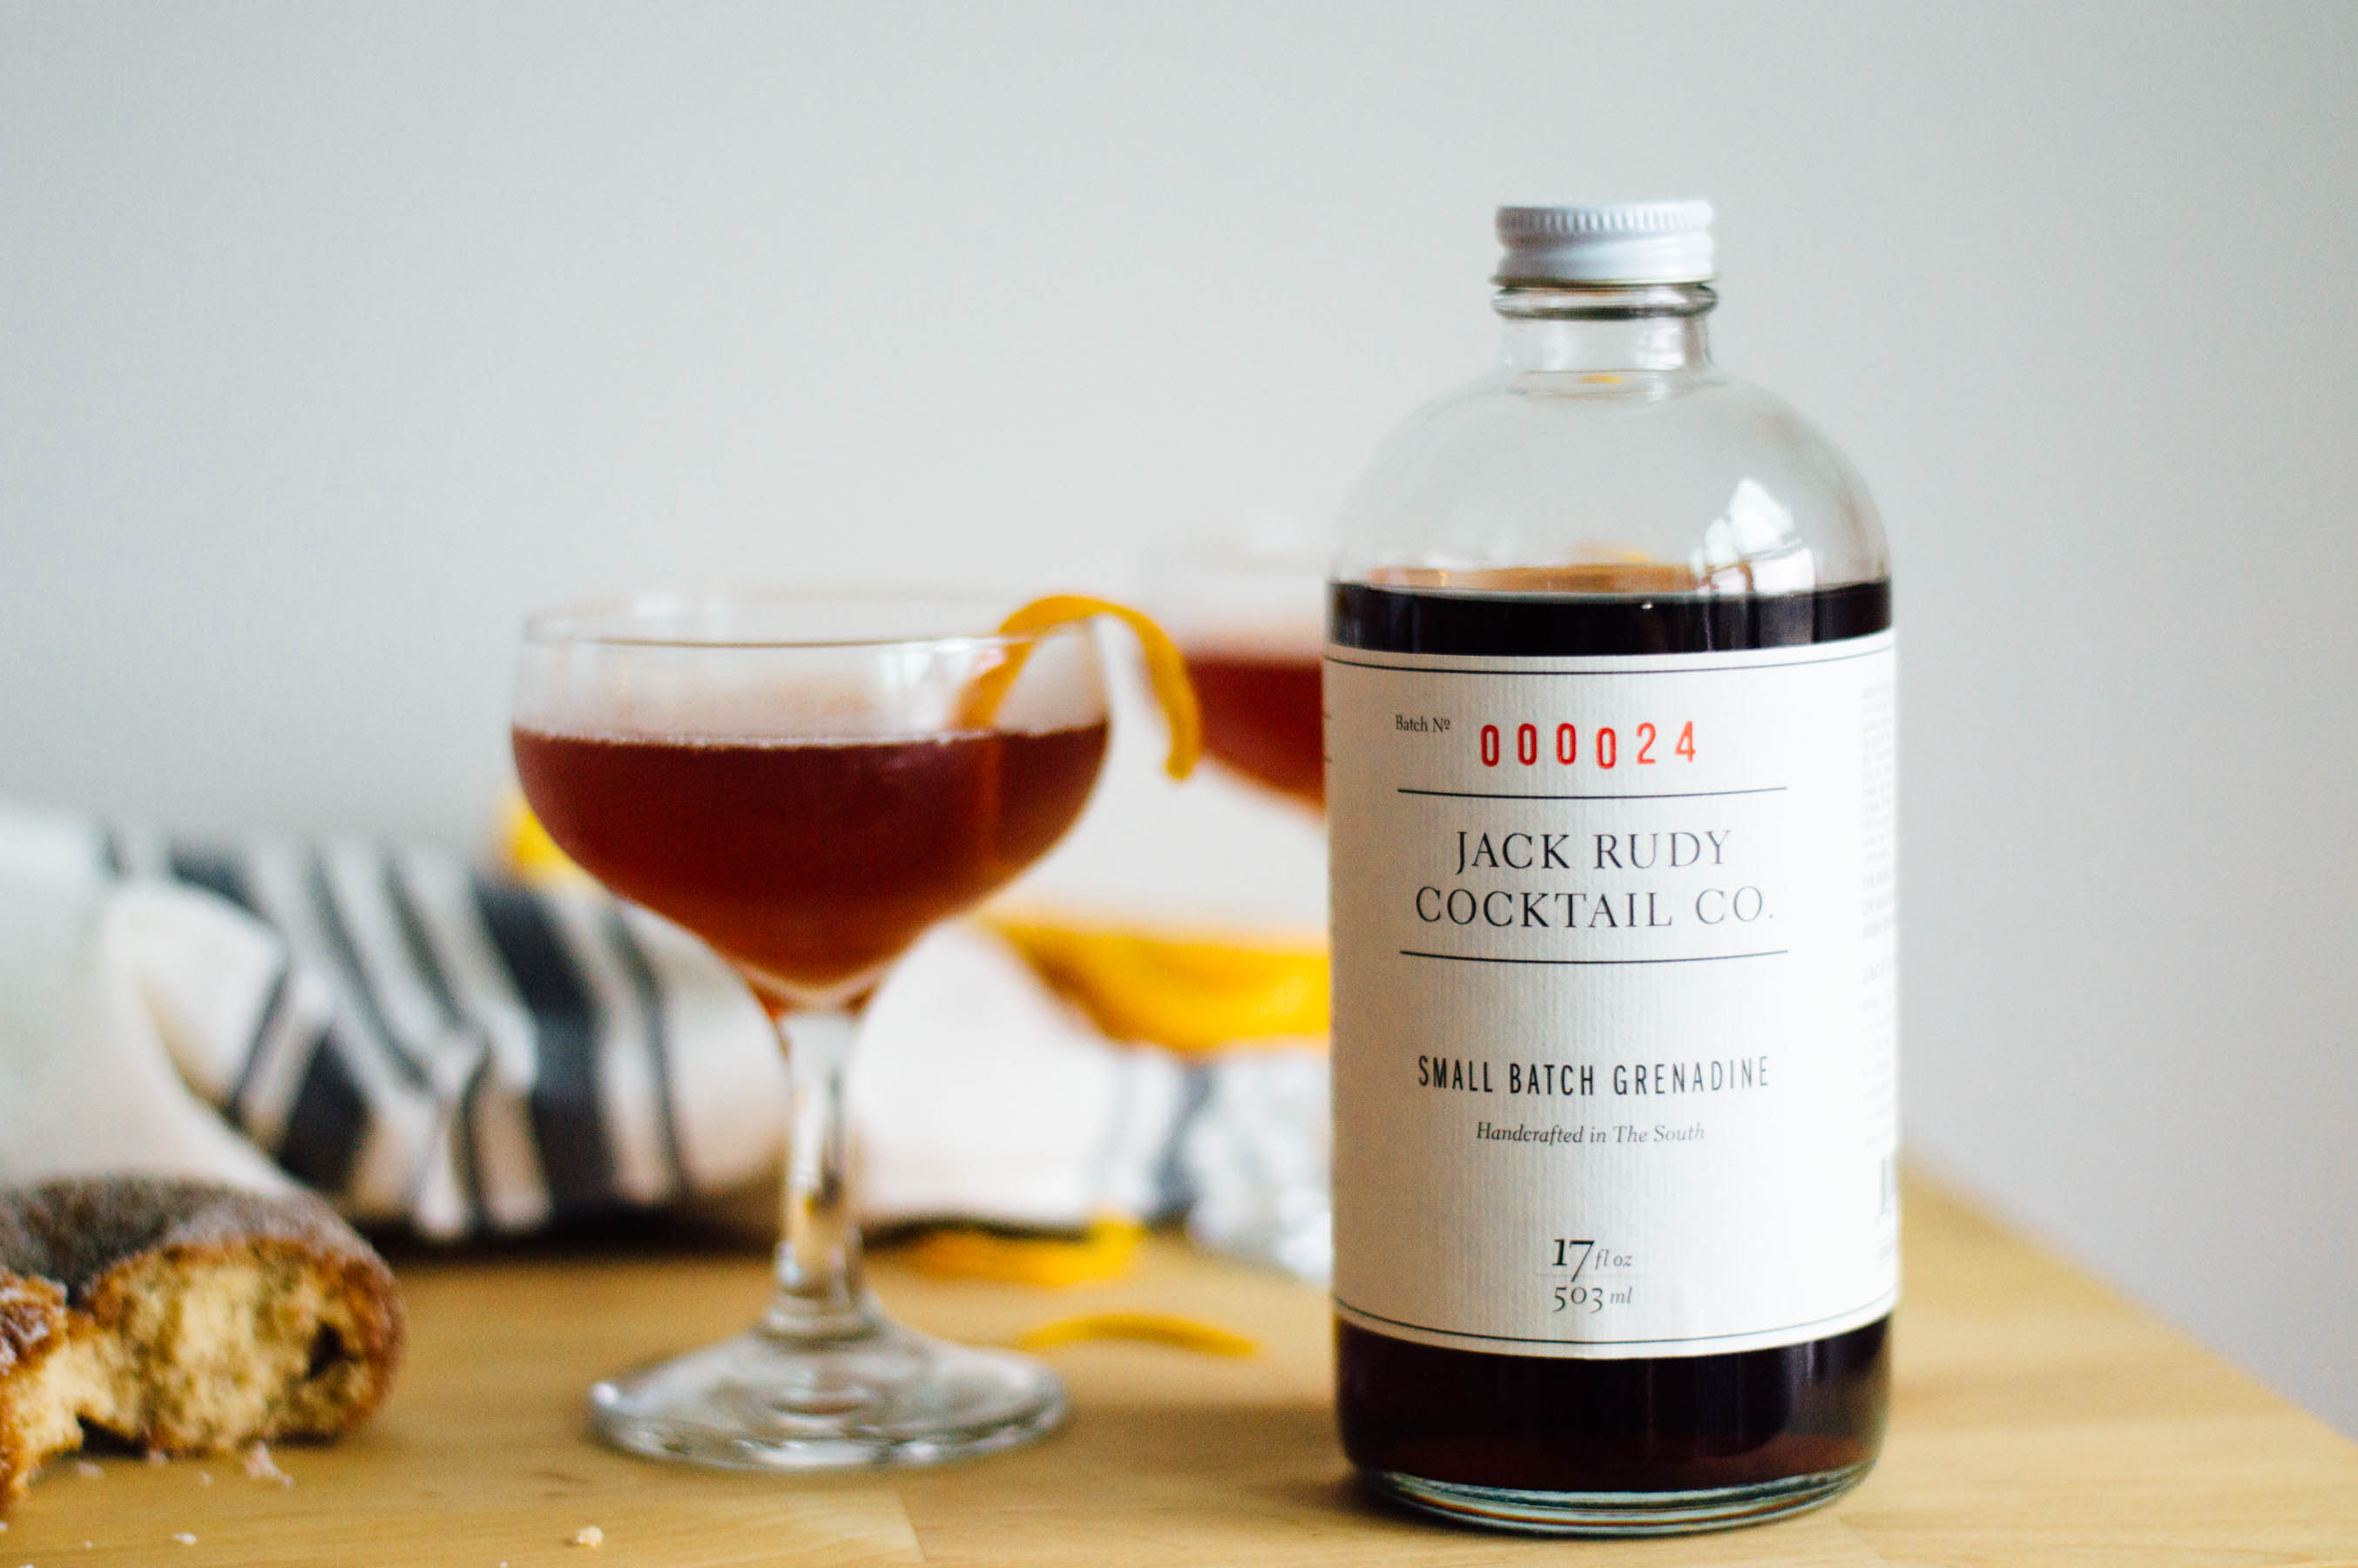 The Jack Rose Cocktail recipe - perfect for serving in a coupe glass during happy hour! | bygabriella.co